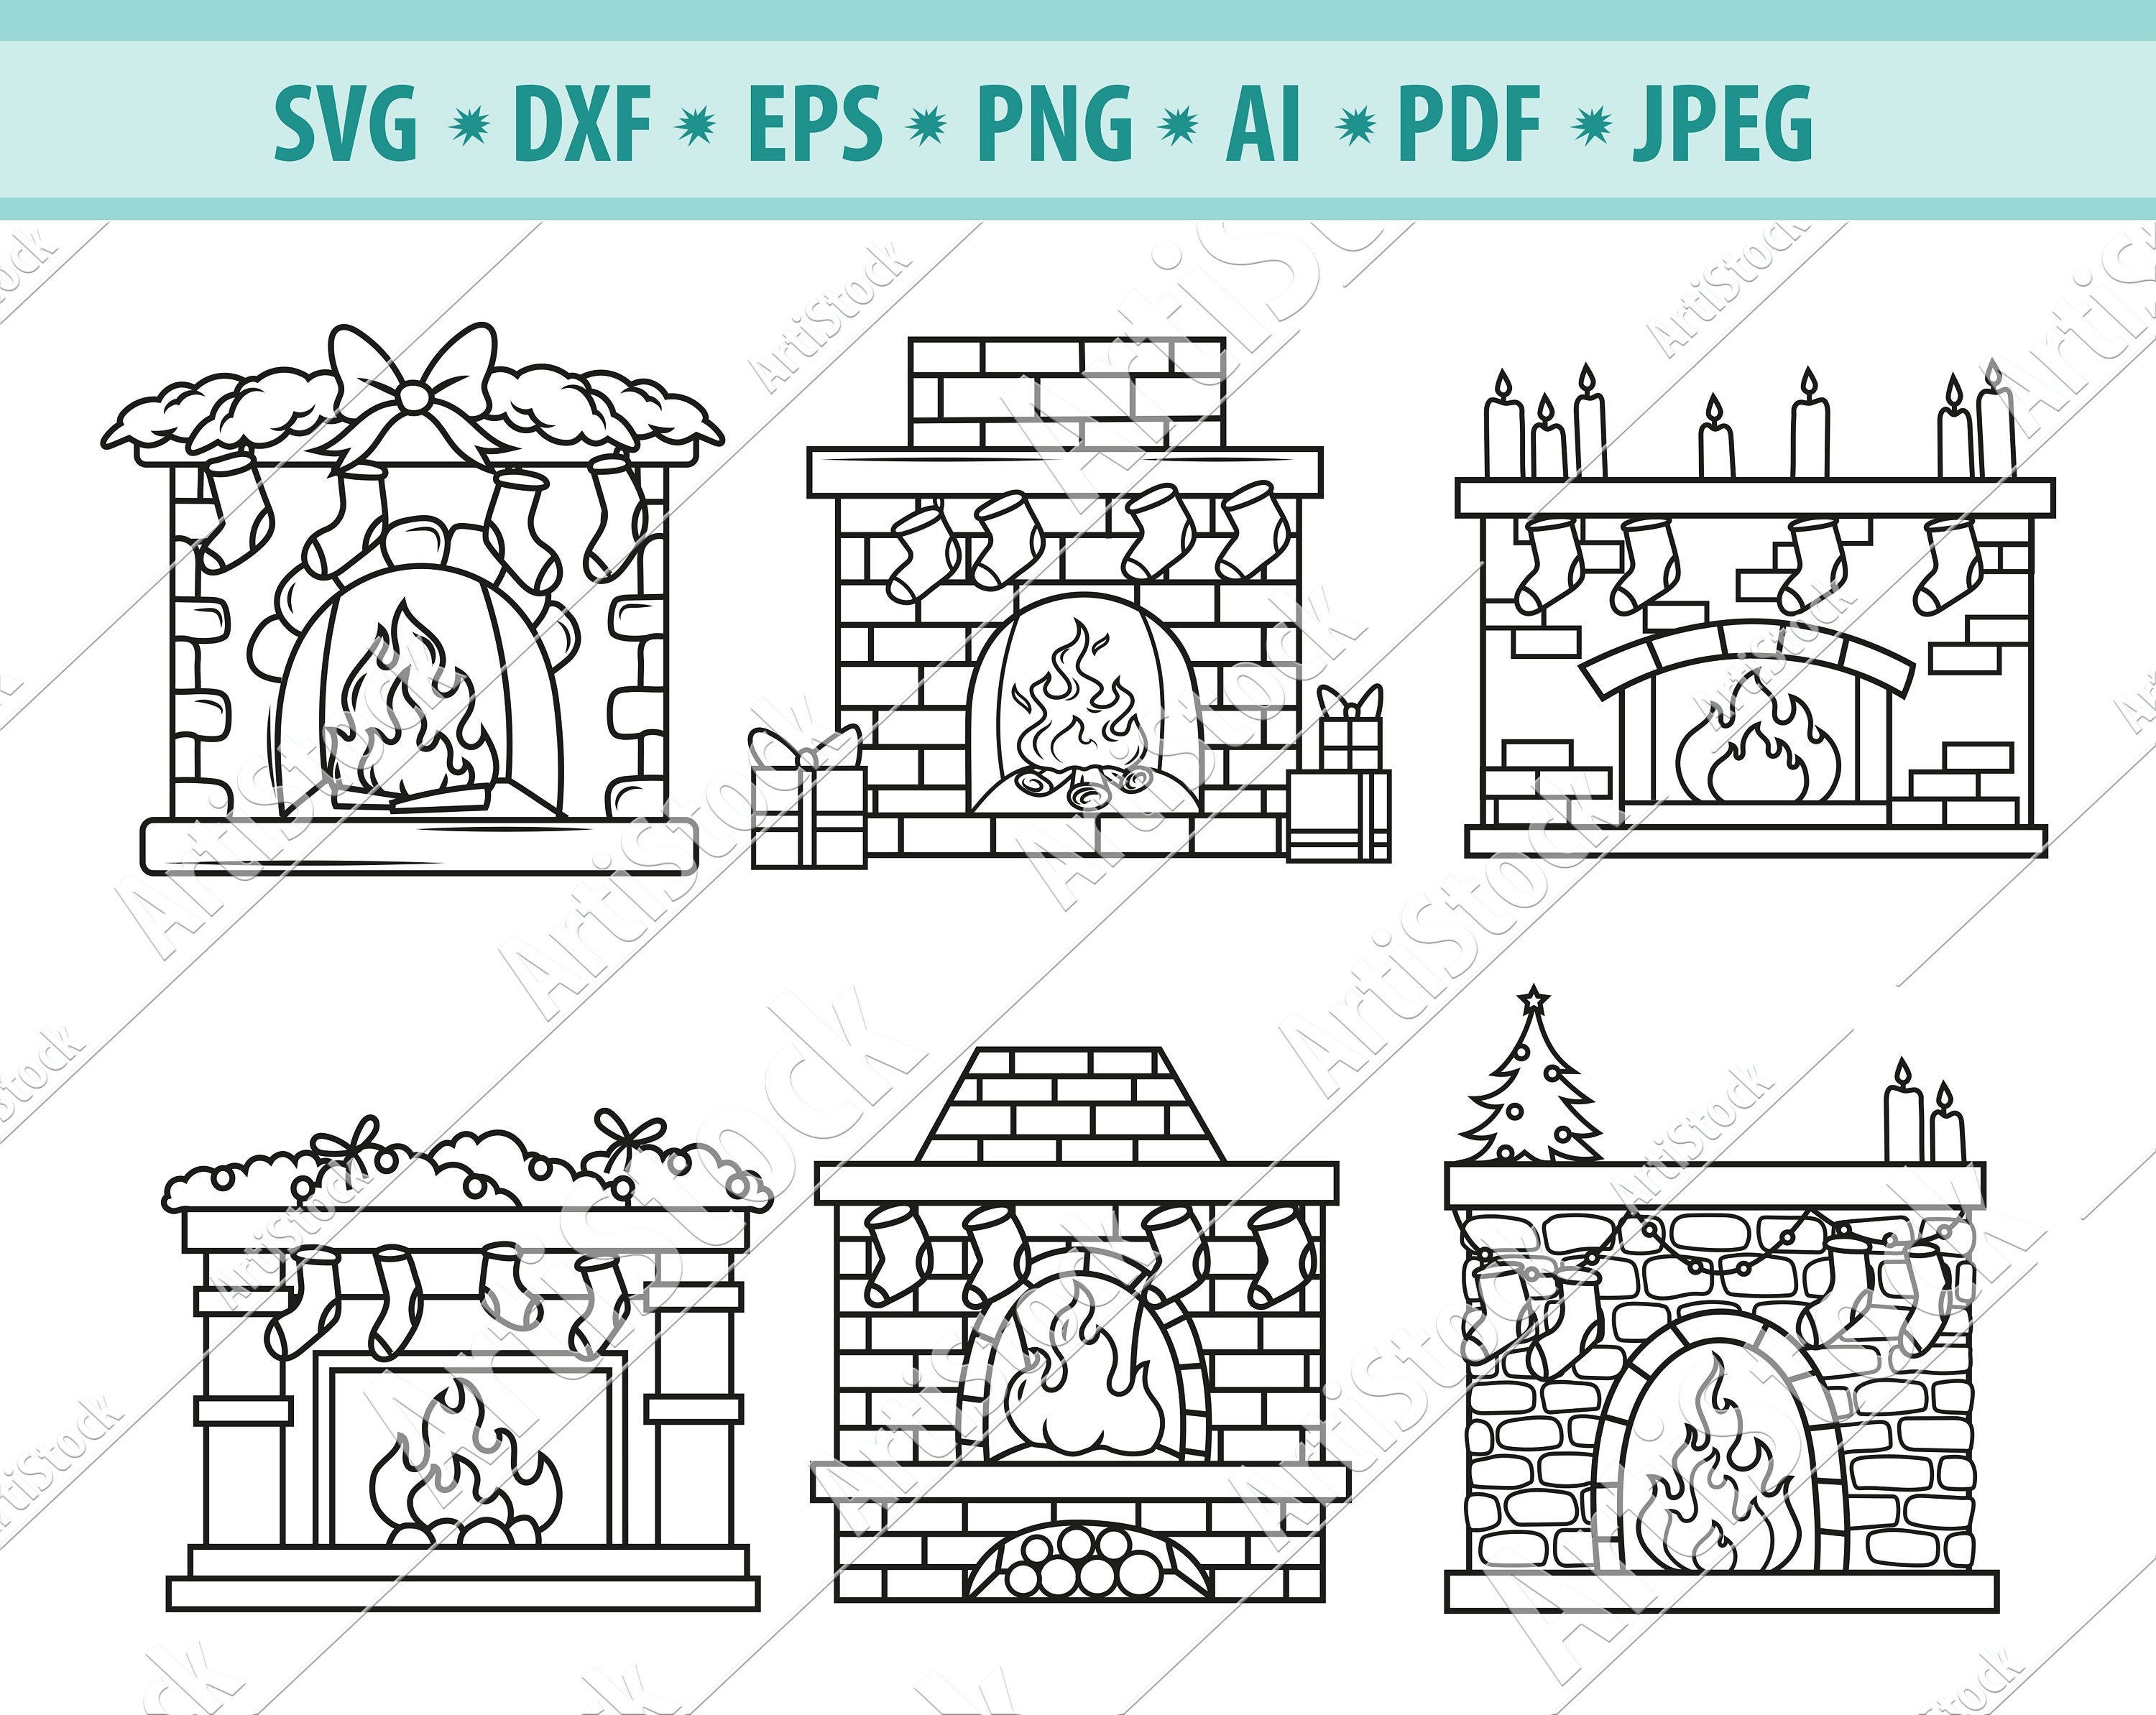 Christmas fireplace Svg, Fireplace Svg, Fireplace clipart, Holiday fireplace with stockings Svg, Candle Svg, File for cricut, Eps, Dxf, Png